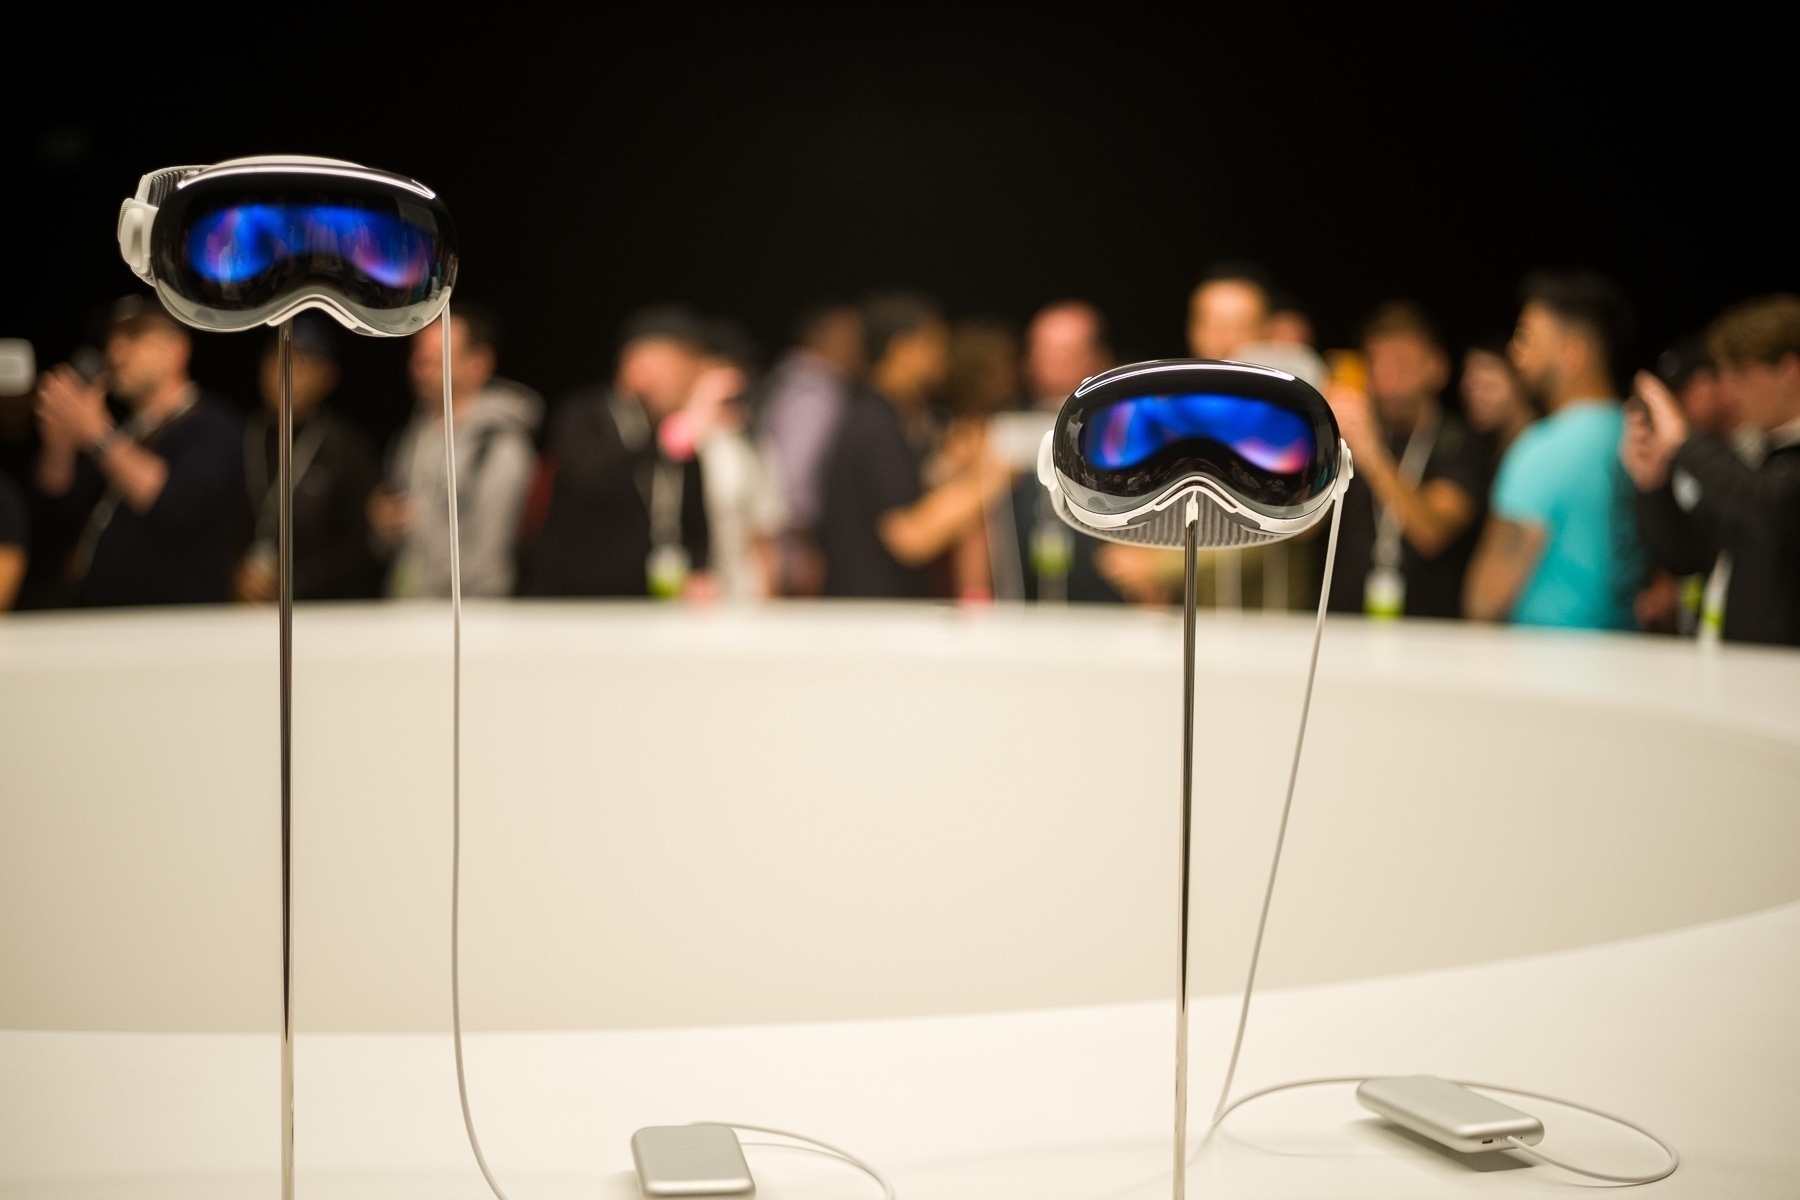 An up-close photo of two Apple Vision Pro devices with people in the blurred background.